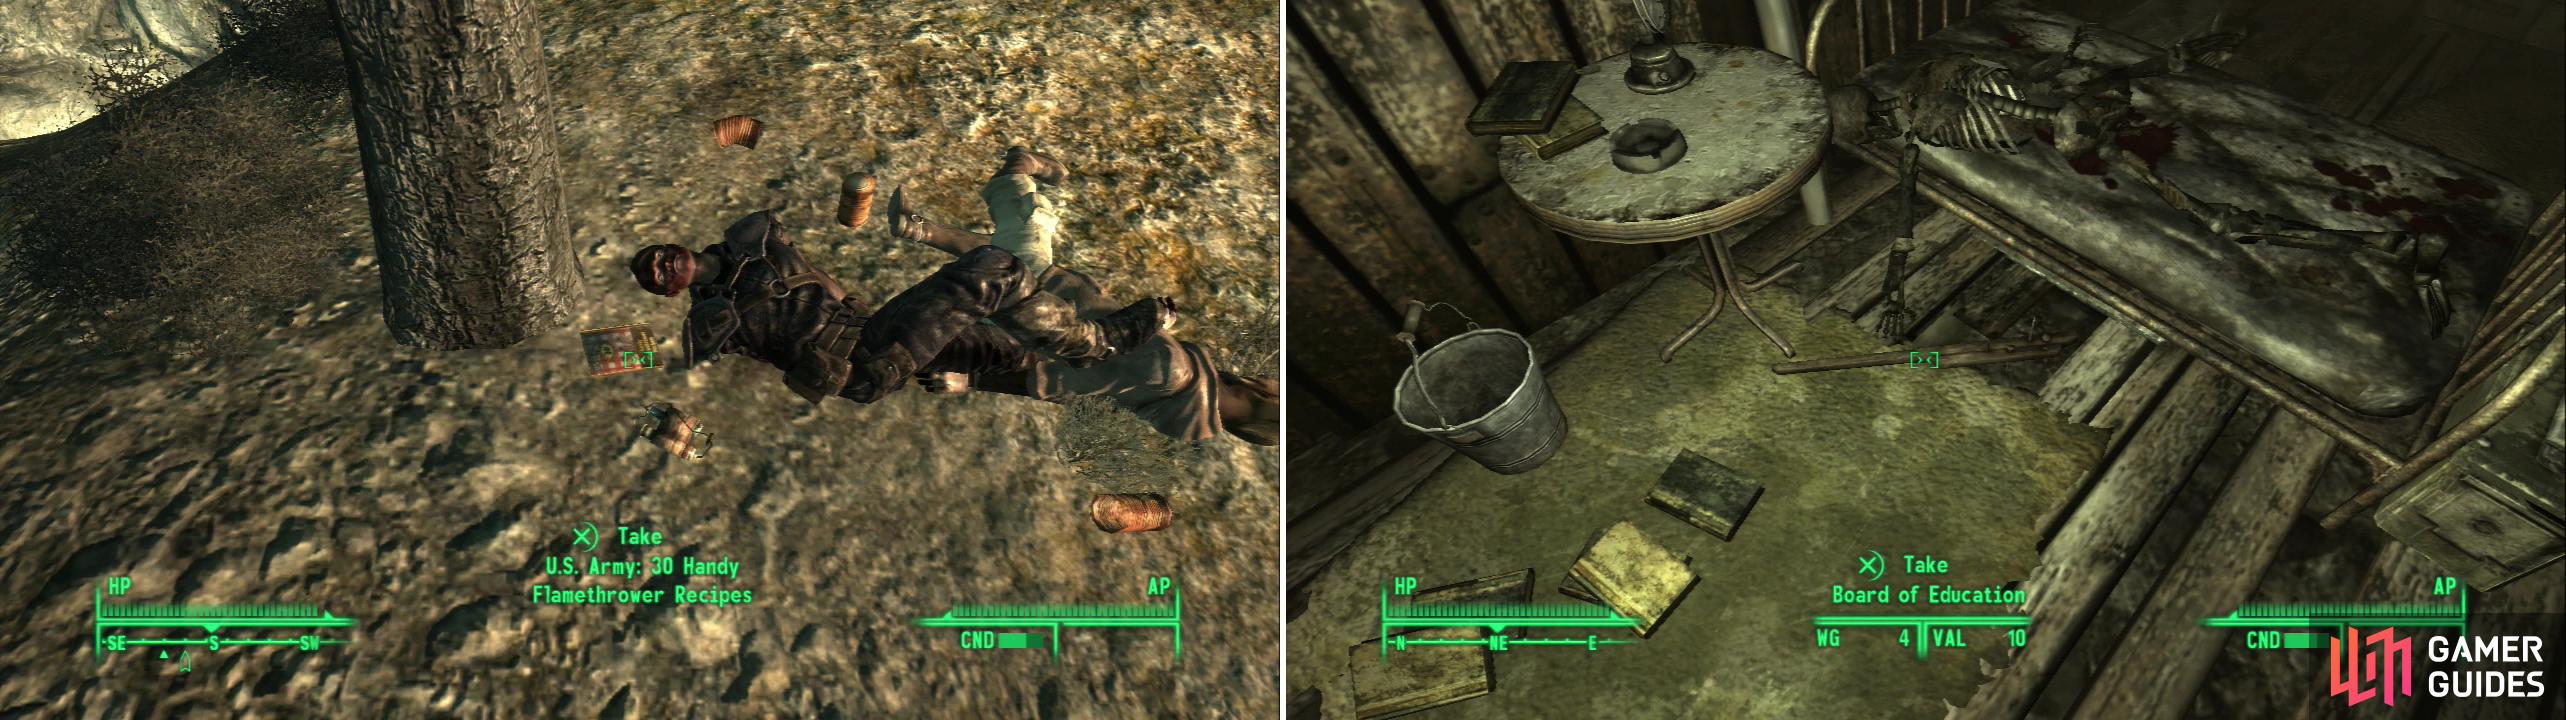 Amongst discarded Tin Cans and a tastefully placed corpse, you’ll find a copy of U.S. Army: 30 Handy Flamethrower Recipes (left). The Board of Education will teach your enemies a thing or two! (right)